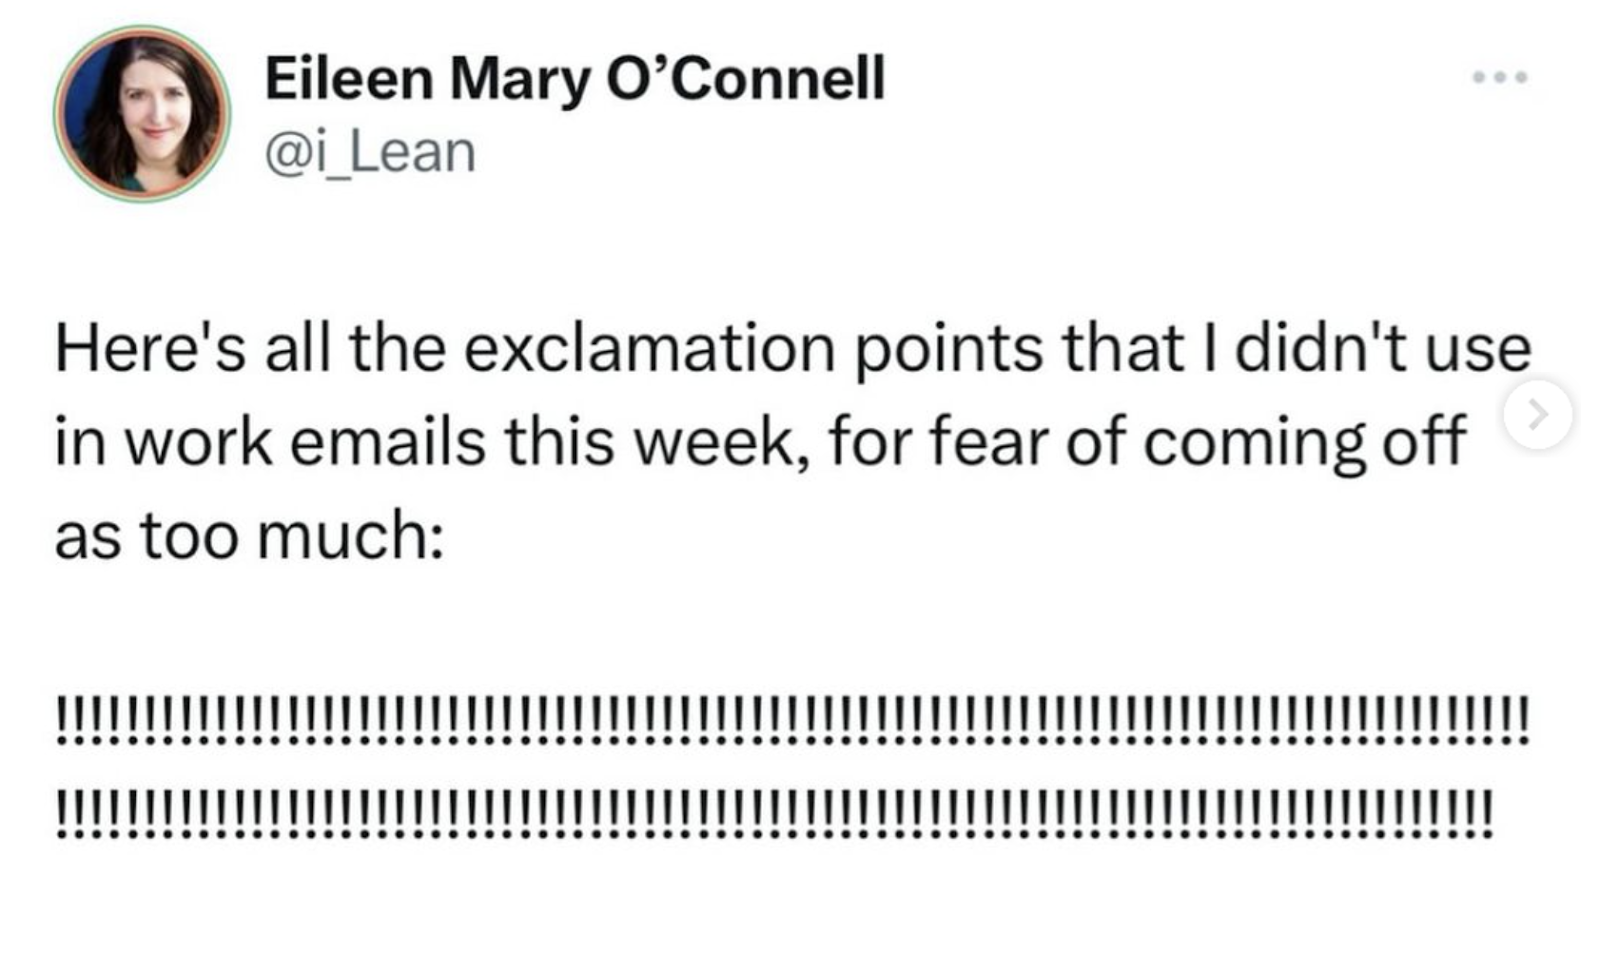 Instagram post by @i_Lean, Eileen Mary O'Connell who says, "Here's all the exclamation points that I didn't use in work emails this week, for fear of coming off as too much colon then it's followed by about 300 exclamation points.